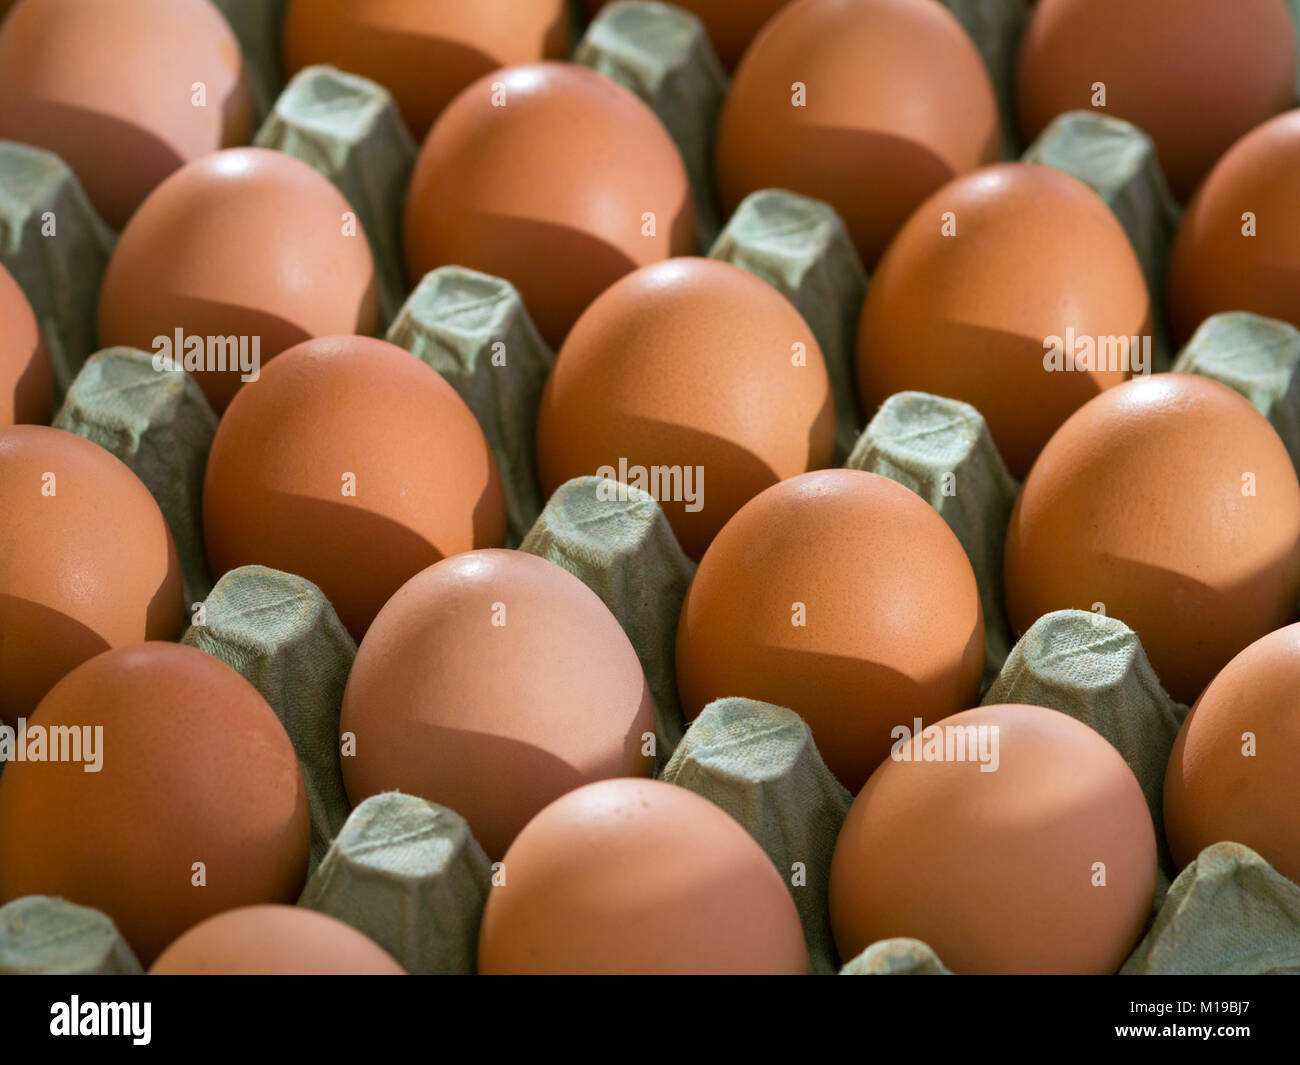 A tray of fresh free range eggs in morning sunlight. Shallow depth of field. Stock Photo